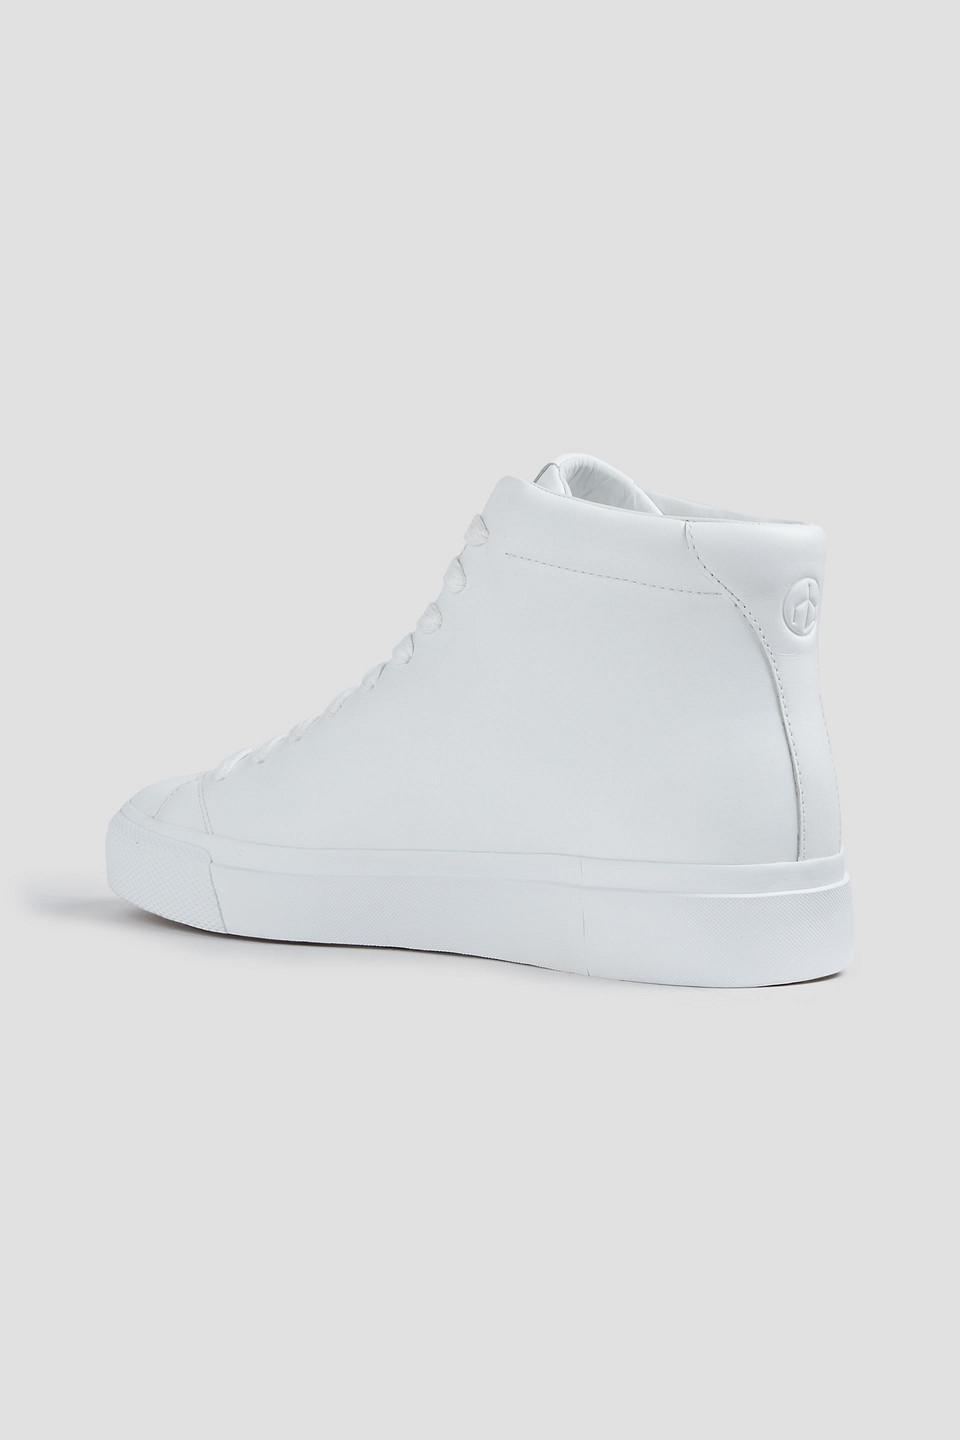 Rag & Bone Rb1 High Embossed Leather Sneakers in White for Men | Lyst